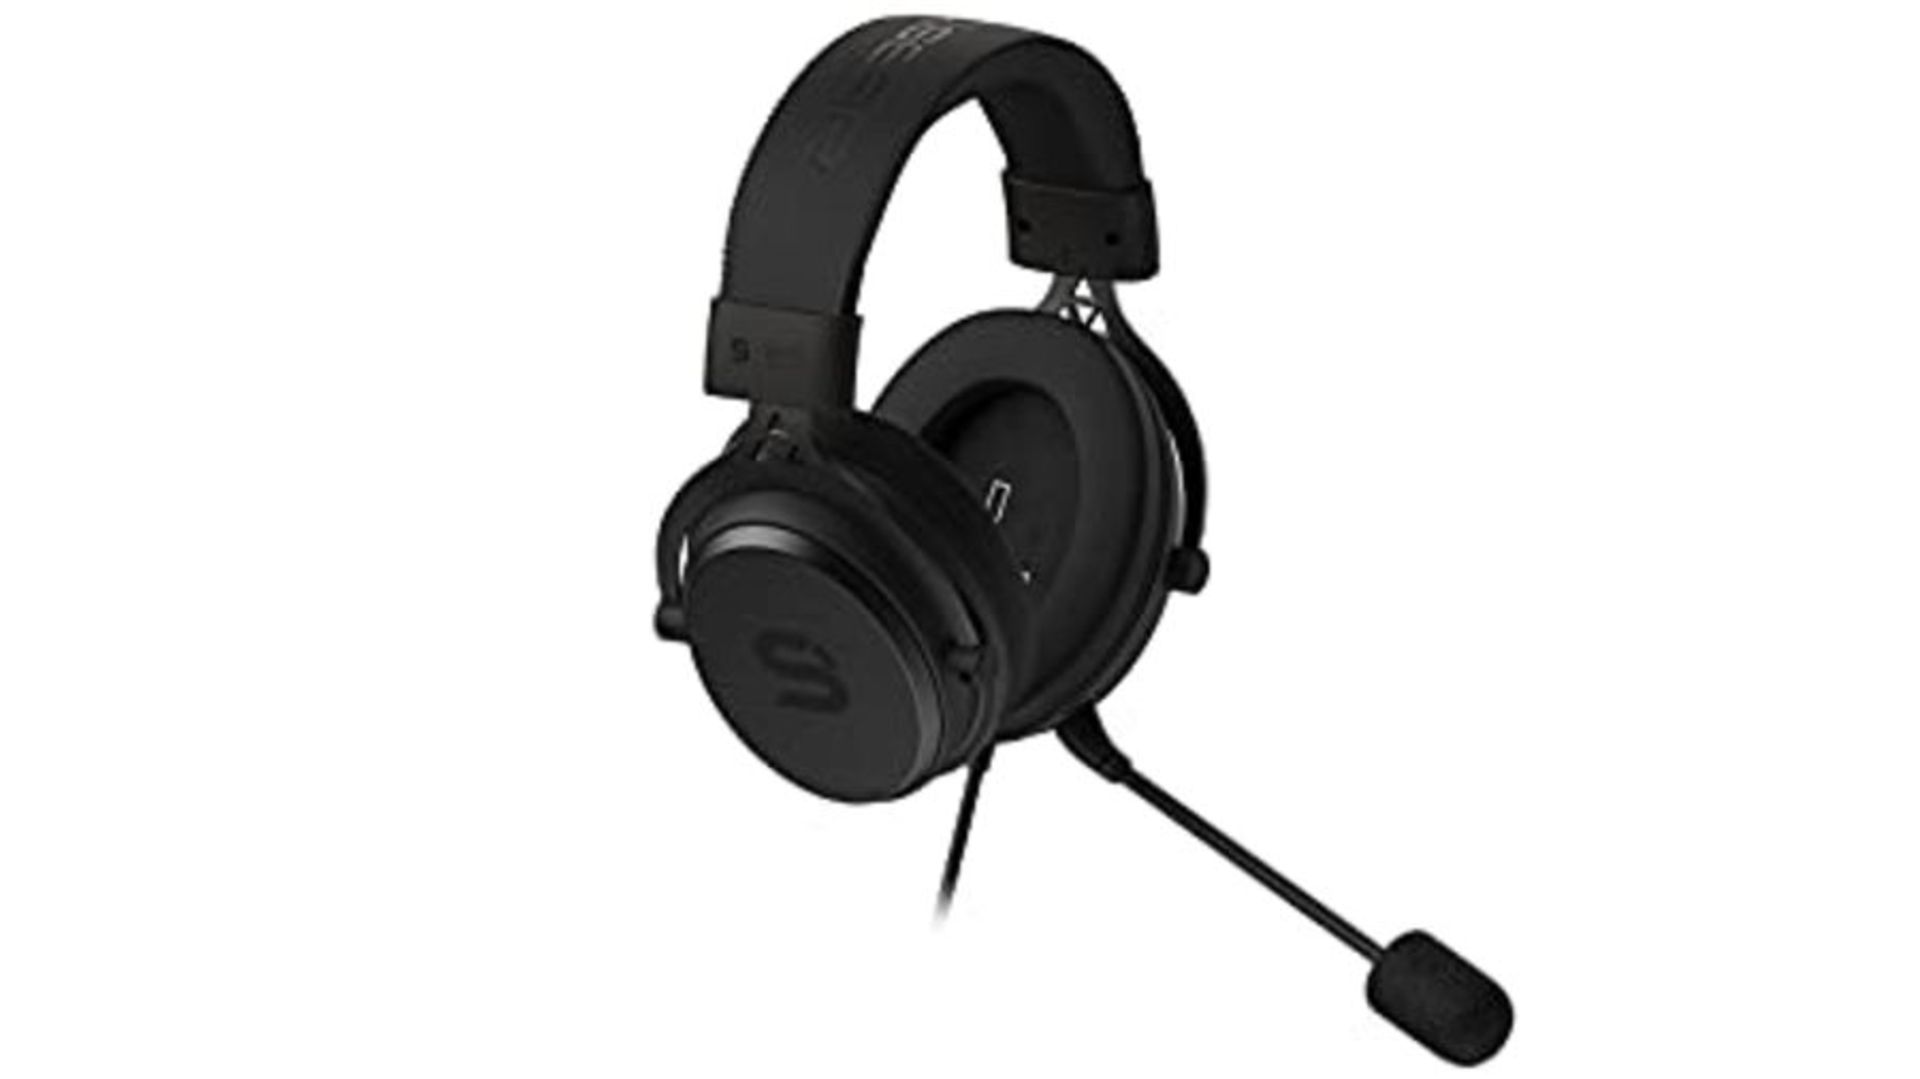 SPC Gear VIRO Gaming Headphones with Detachable Microphone (3.5 mm Jack, 270 cm and 12